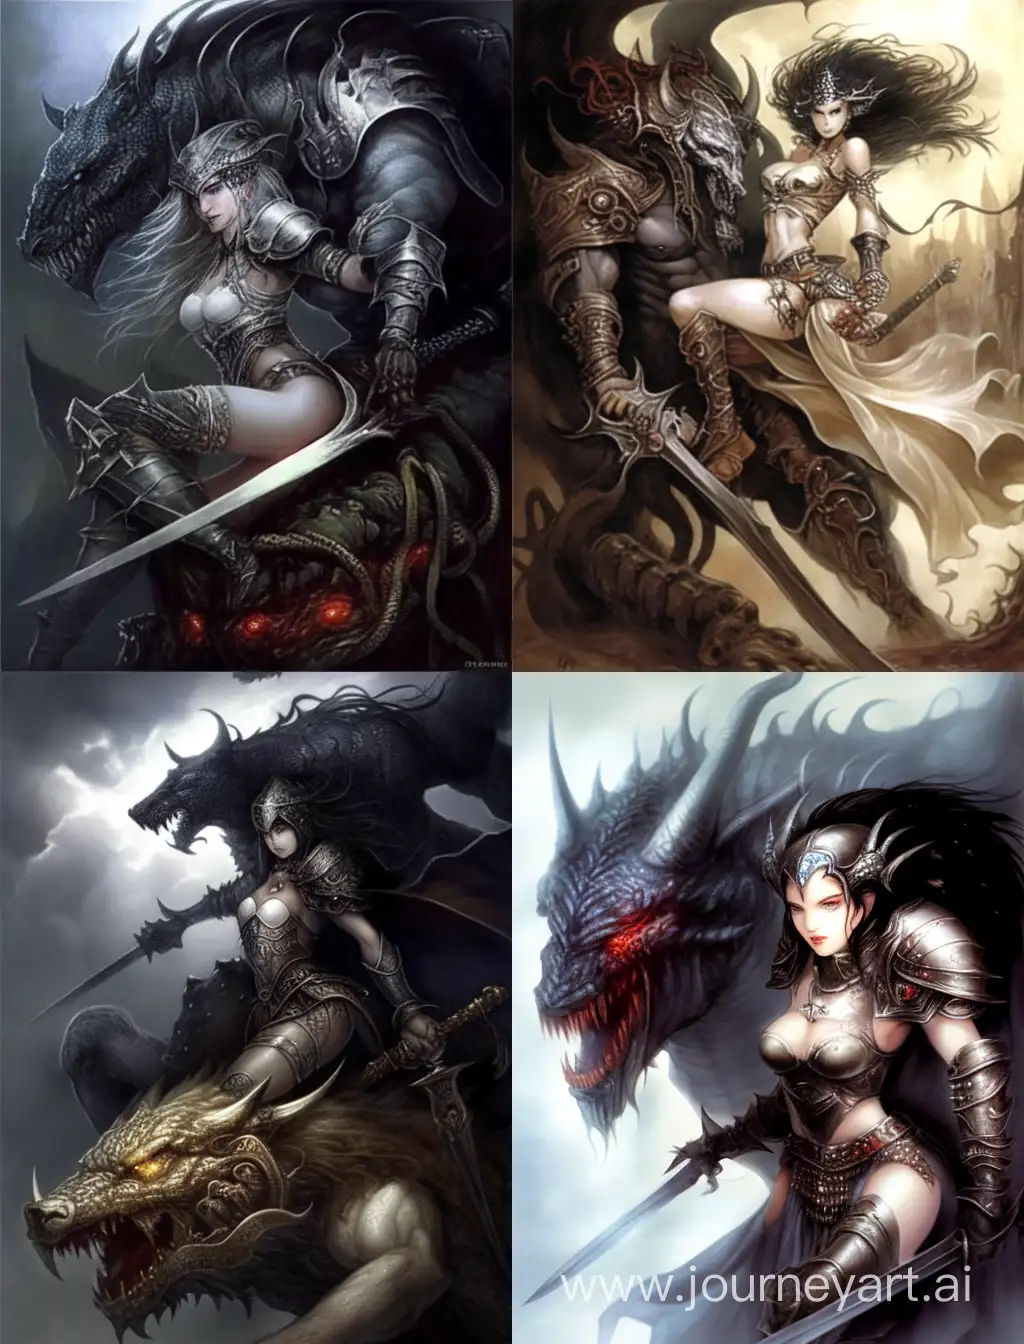 Fierce-Female-Warrior-Commands-Enormous-Wicked-Creature-in-Stunning-Luis-Royoinspired-Fantasy-Art